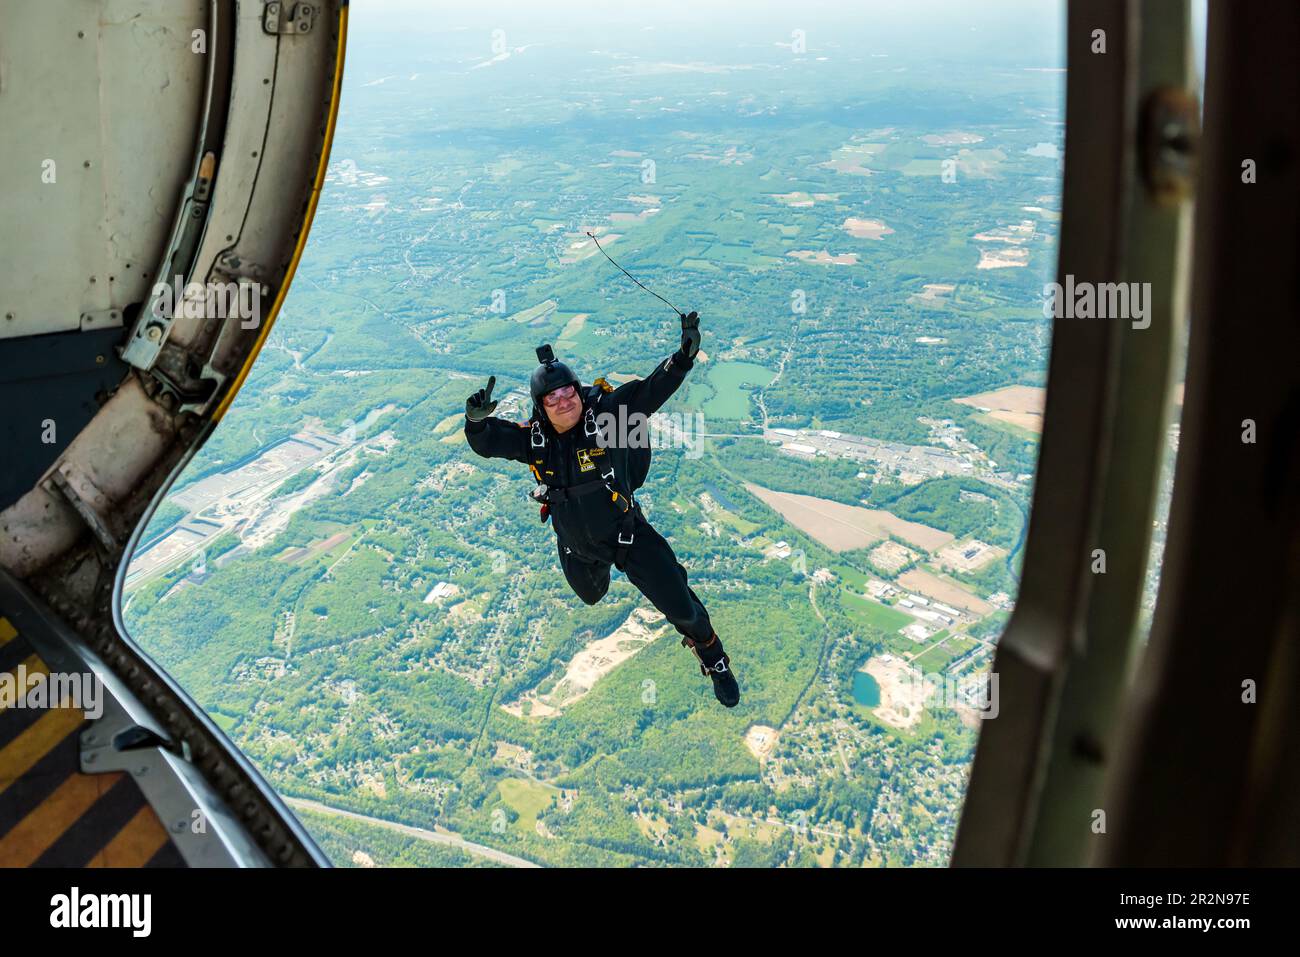 SSG Nahu Ramirez waving as he jumps from the US Army Golden Knights' plane at the Westfield International Airshow. Stock Photo